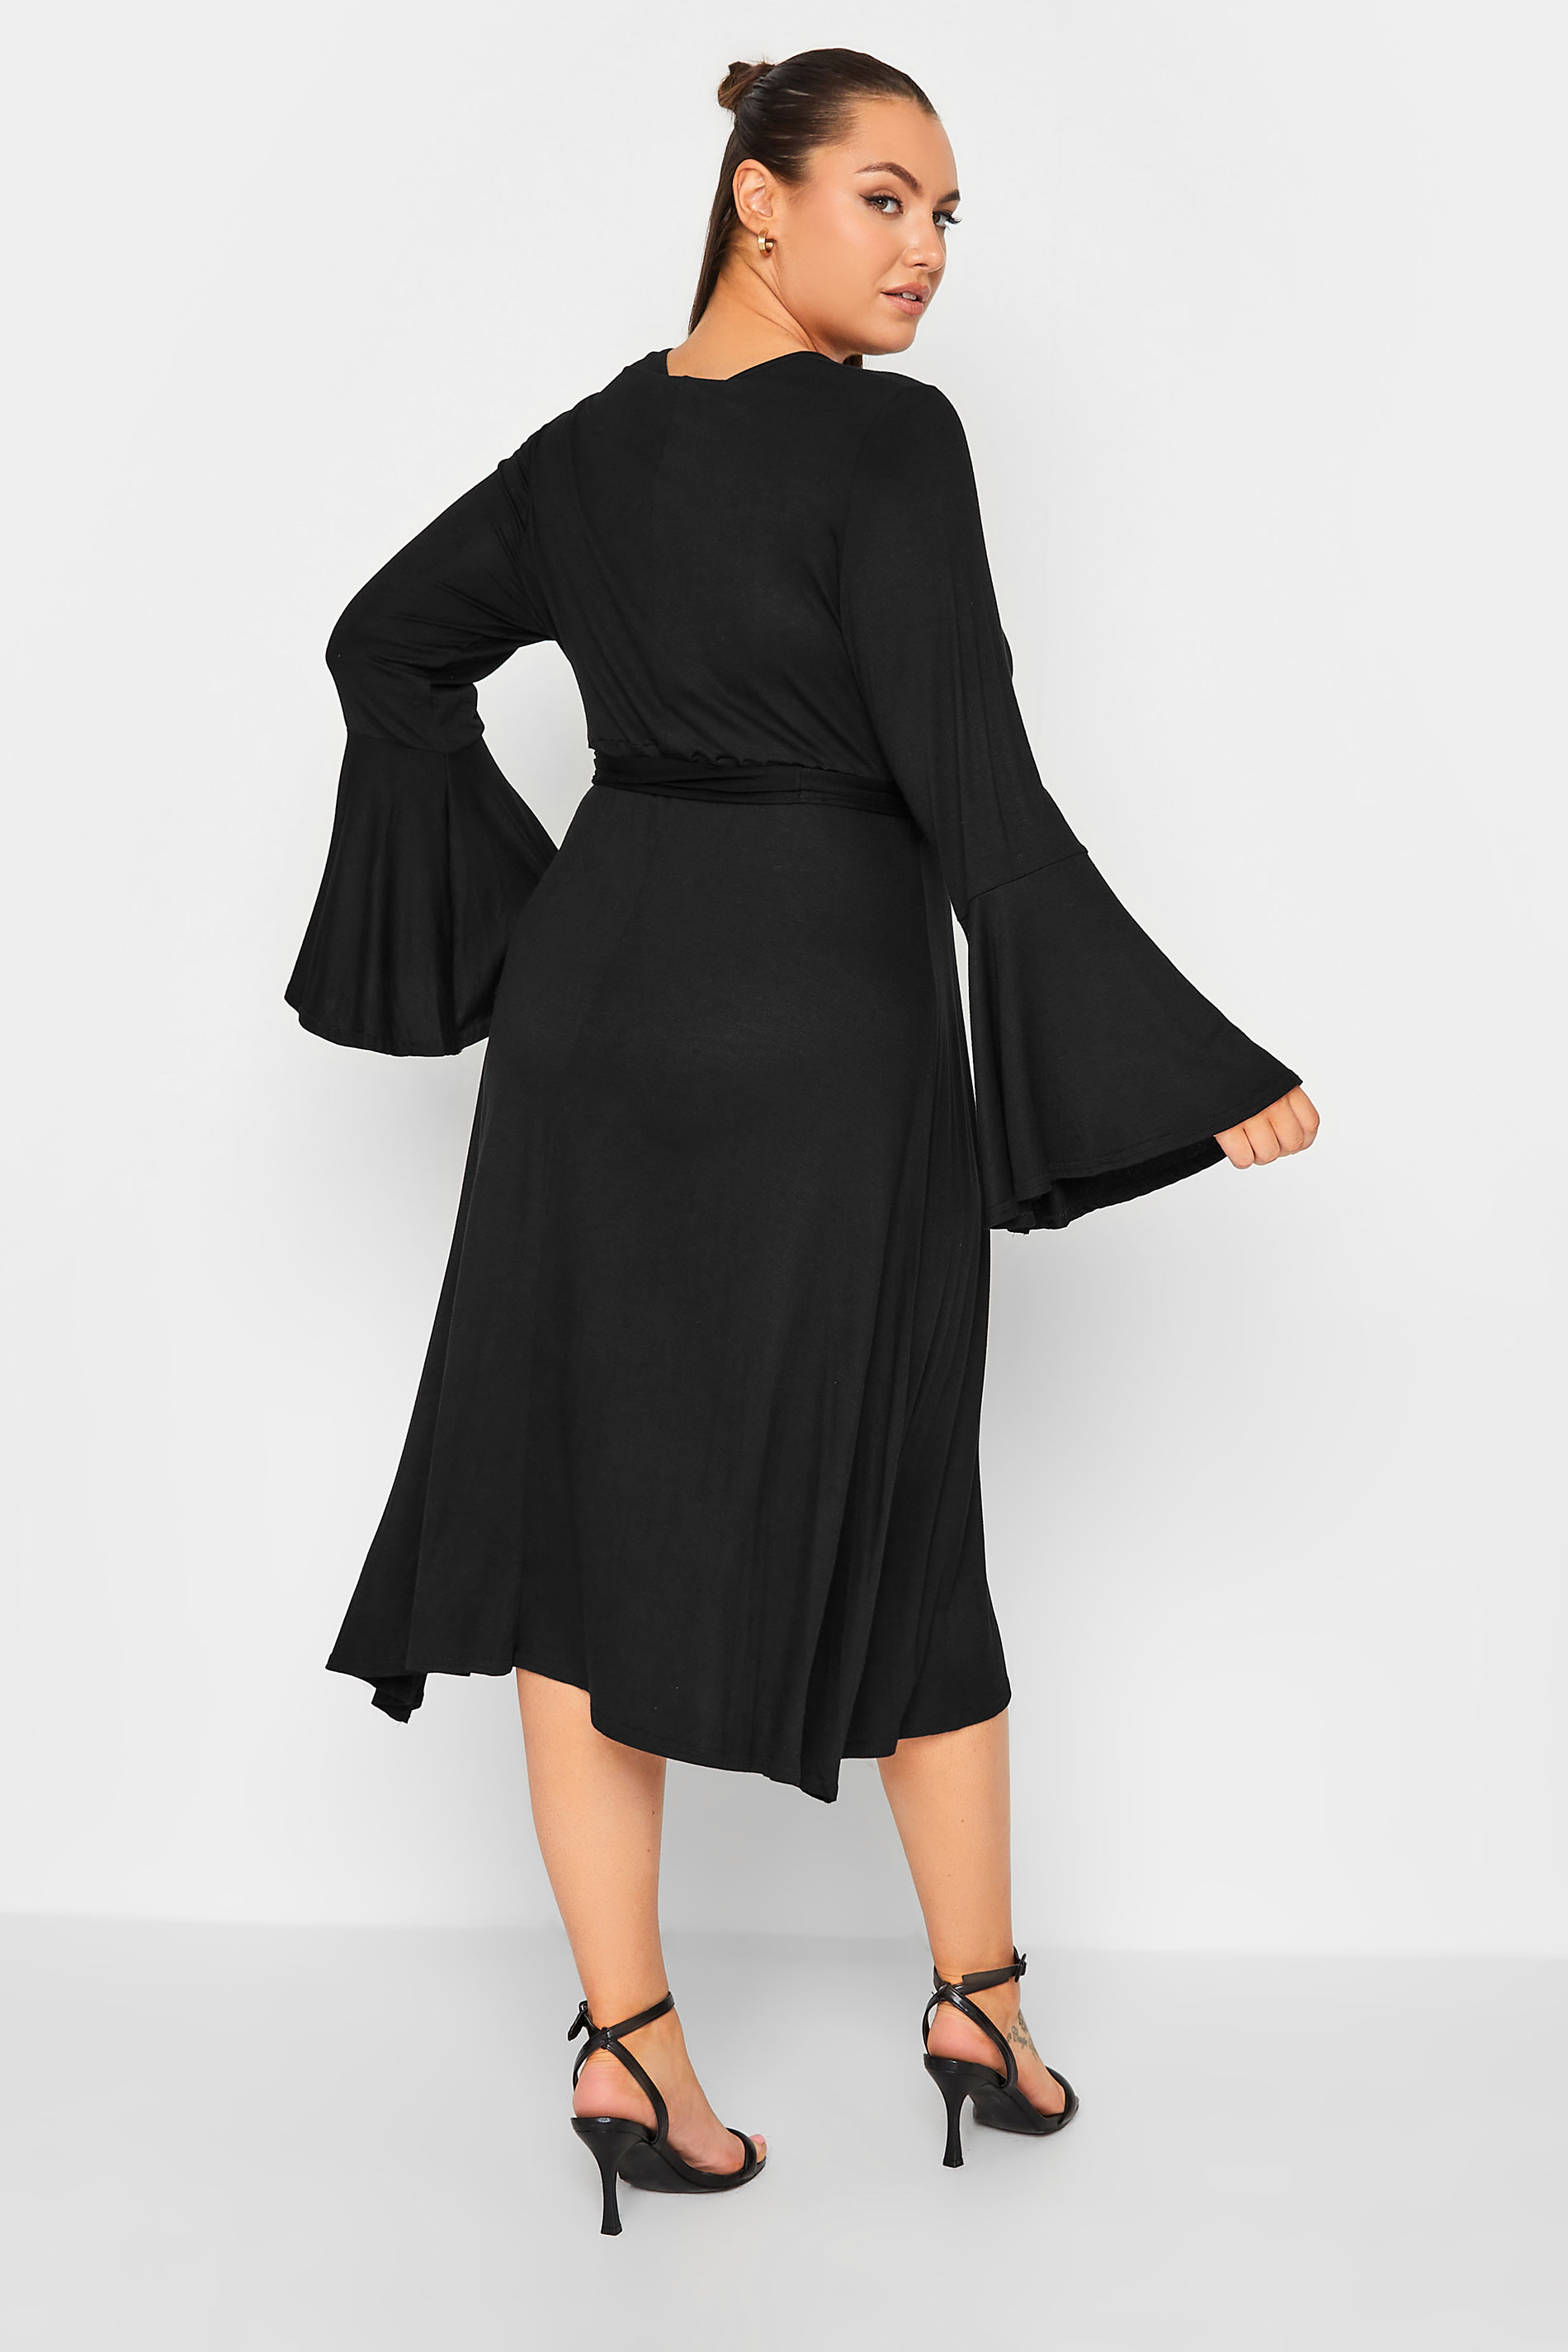 LIMITED COLLECTION Plus Size Black Flare Sleeve Wrap Dress | Yours Clothing 3